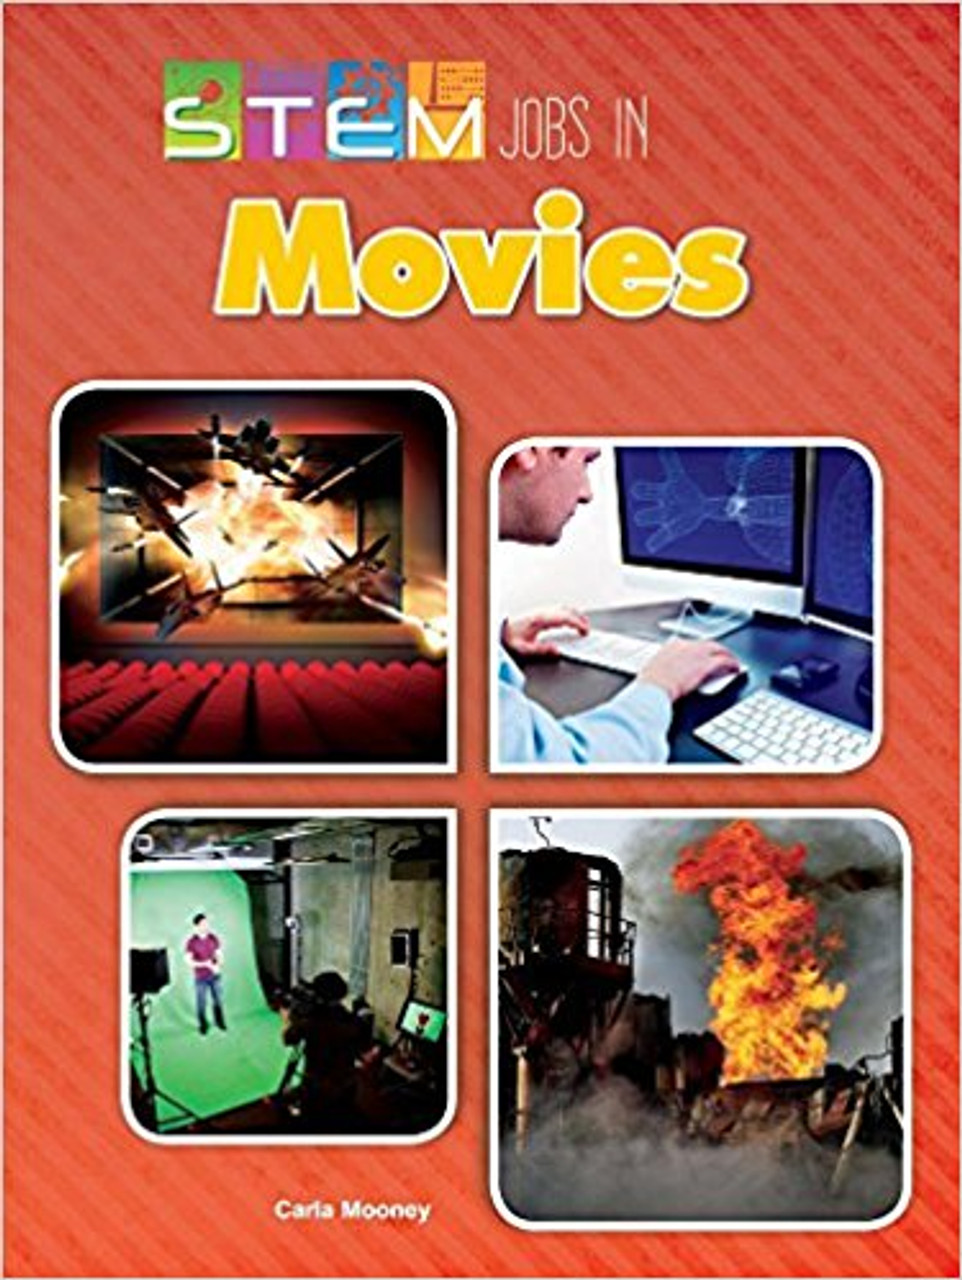 Some of the most exciting careers are in STEM fields. A strong STEM education will allow you to research, test, and build new things. If you like movies, this book will teach you all about computer animation, industrial light and technical animators, motion capture engineers, and what education and degrees it takes to obtain these exciting careers. Learn all the tricks they use to make the special effects and simulations that make today's movies more exciting! This book will allow students to develop a model to generate data for iterative testing and modification of a proposed object, tool, or process such that an optimal design can be achieved.